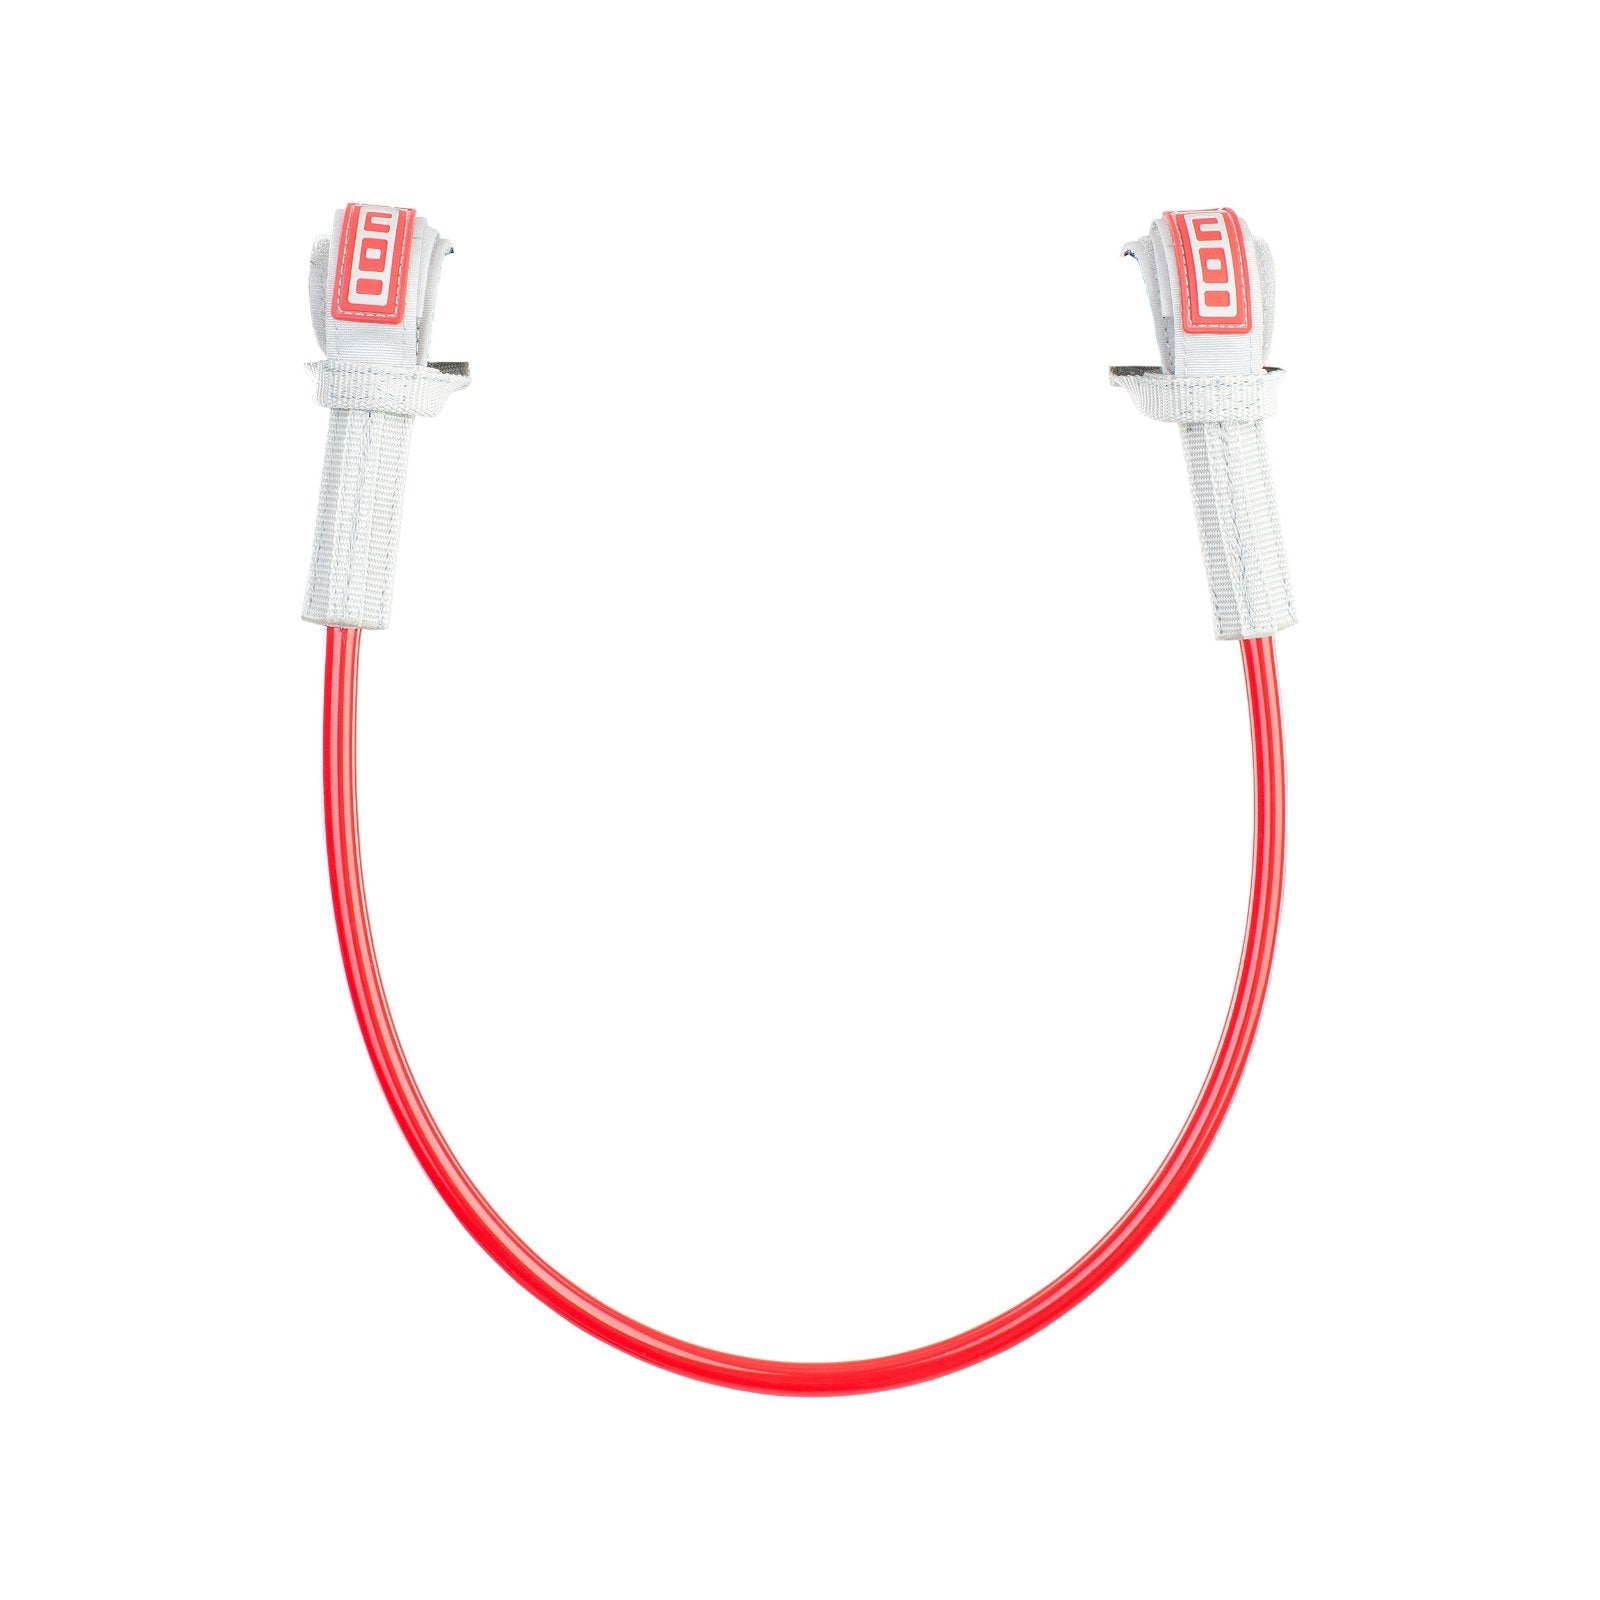 ION Windsurf Harness Line Tec 2024-ION Water-22'-red-48210-7073-9008415960781-Surf-store.com